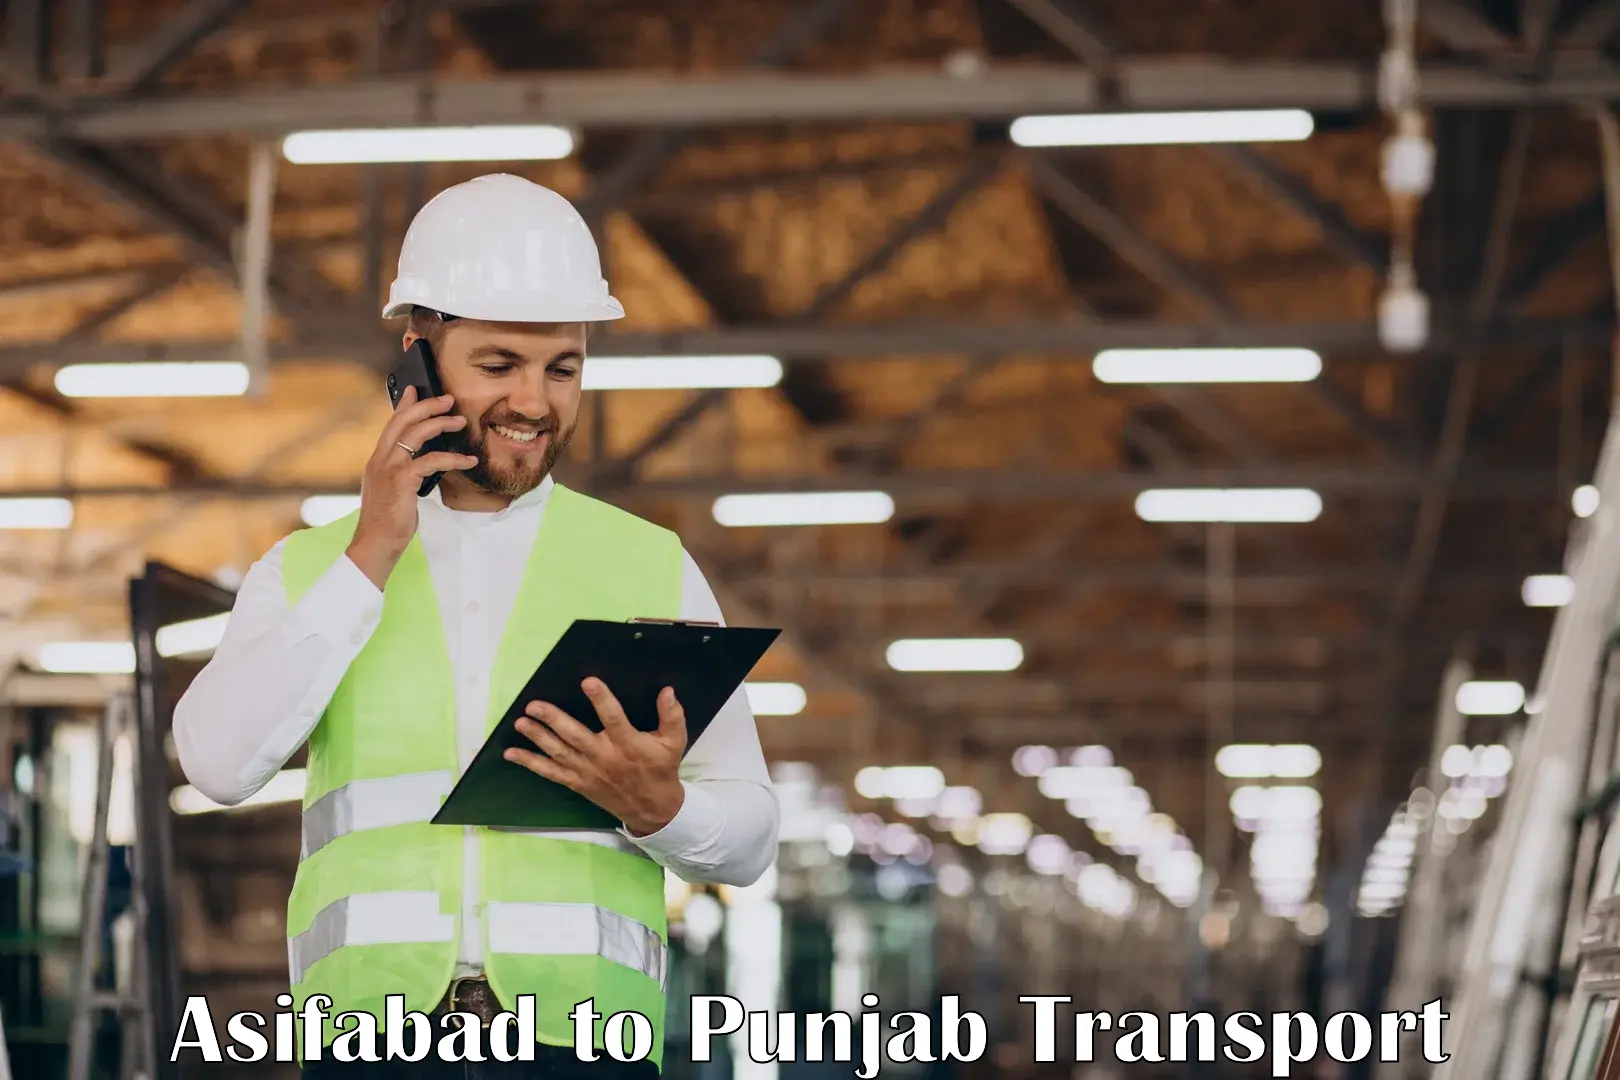 Daily transport service Asifabad to Patiala